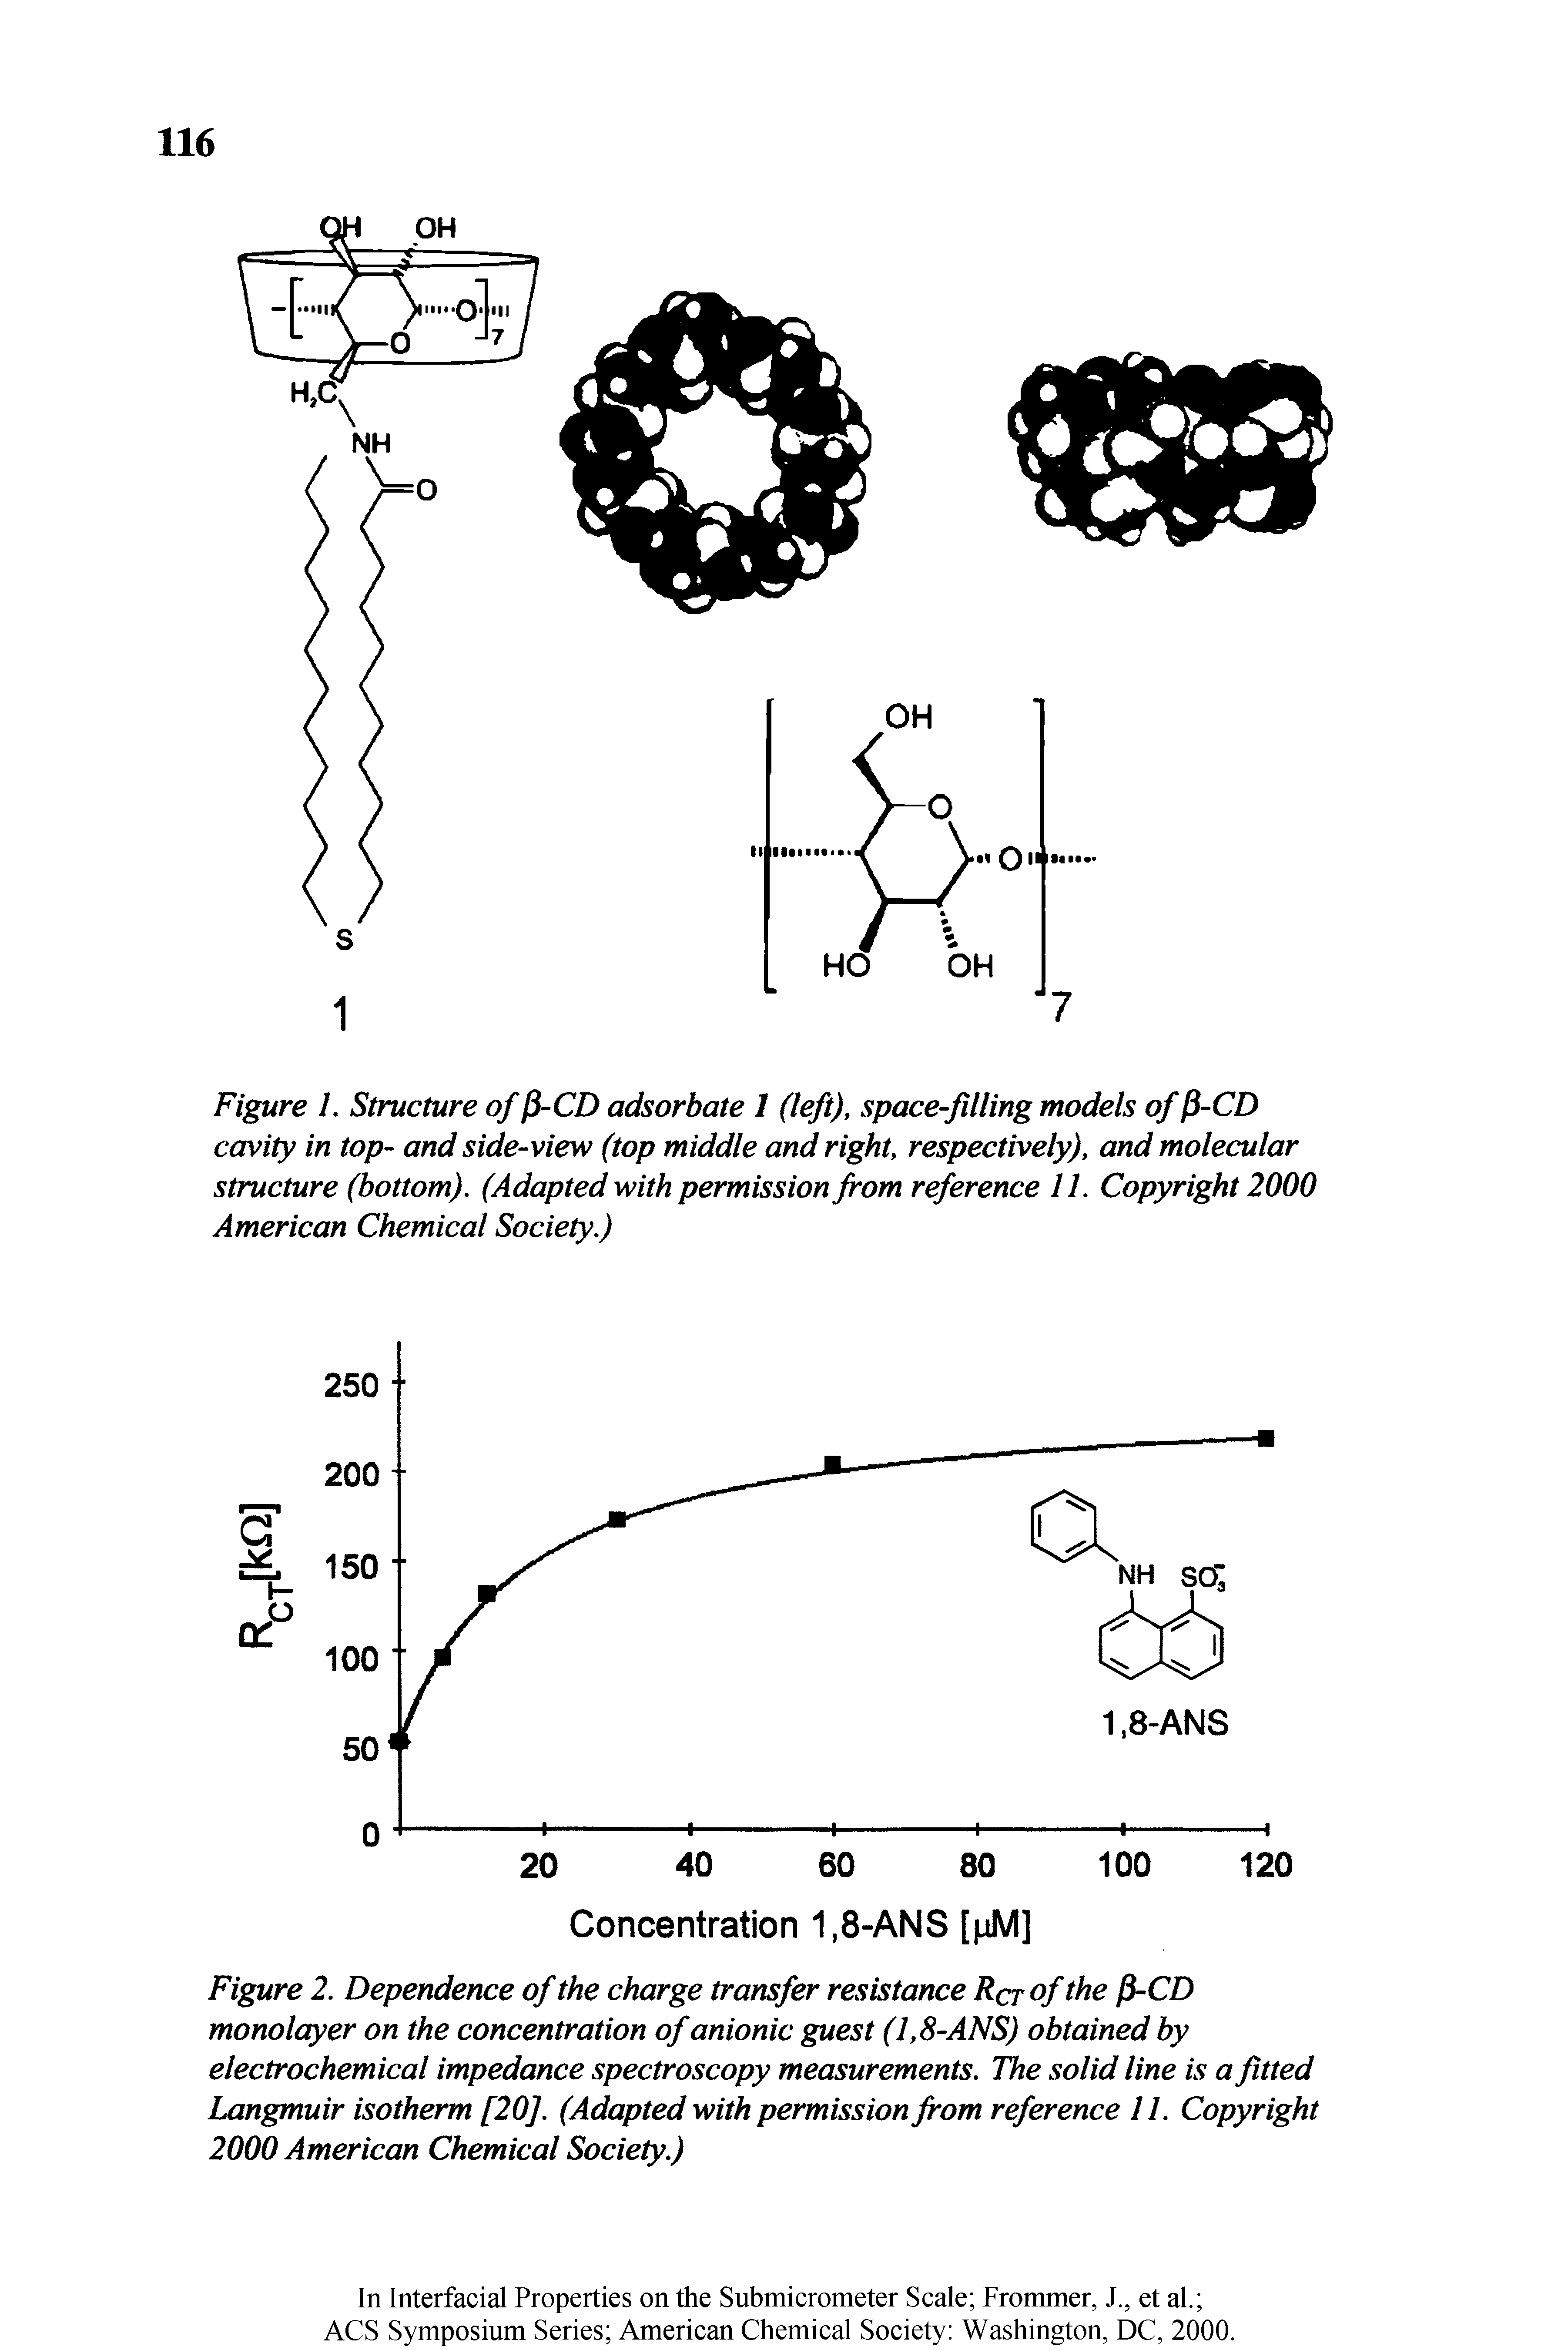 Figure 2. Dependence of the charge transfer resistance Rct of the P-CD monolayer on the concentration of anionic guest (1,8-ANS) obtained by electrochemical impedance spectroscopy measurements. The solid line is a fitted Langmuir isotherm [20]. (Adapted with permission from reference 11. Copyright 2000 American Chemical Society.)...